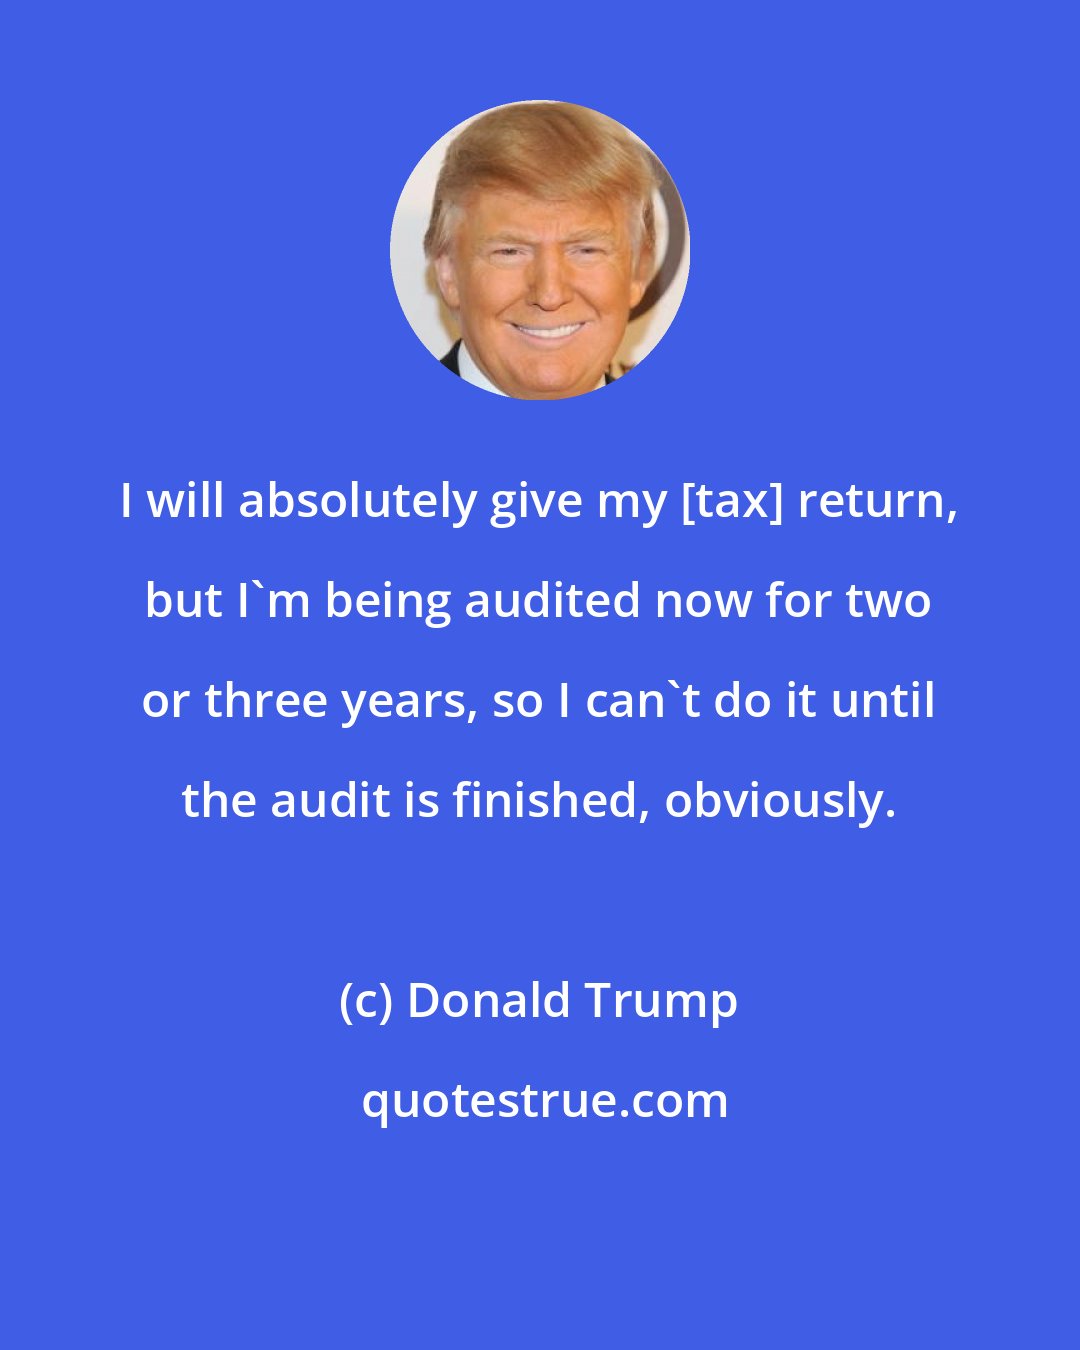 Donald Trump: I will absolutely give my [tax] return, but I'm being audited now for two or three years, so I can't do it until the audit is finished, obviously.